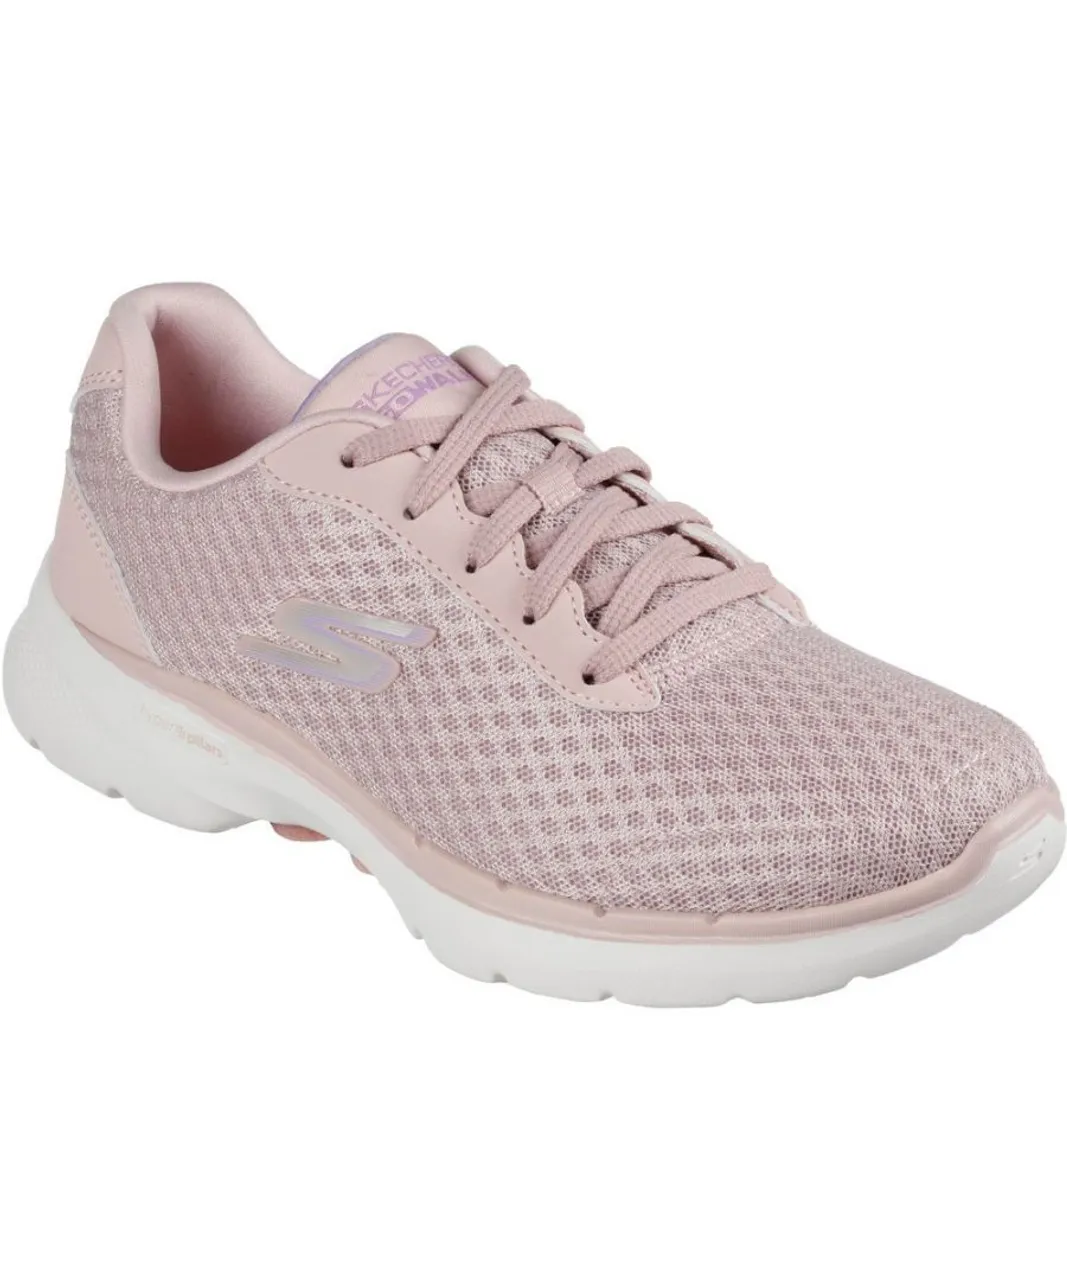 Skechers GO walk 6 Iconic Vision Womens - Pink